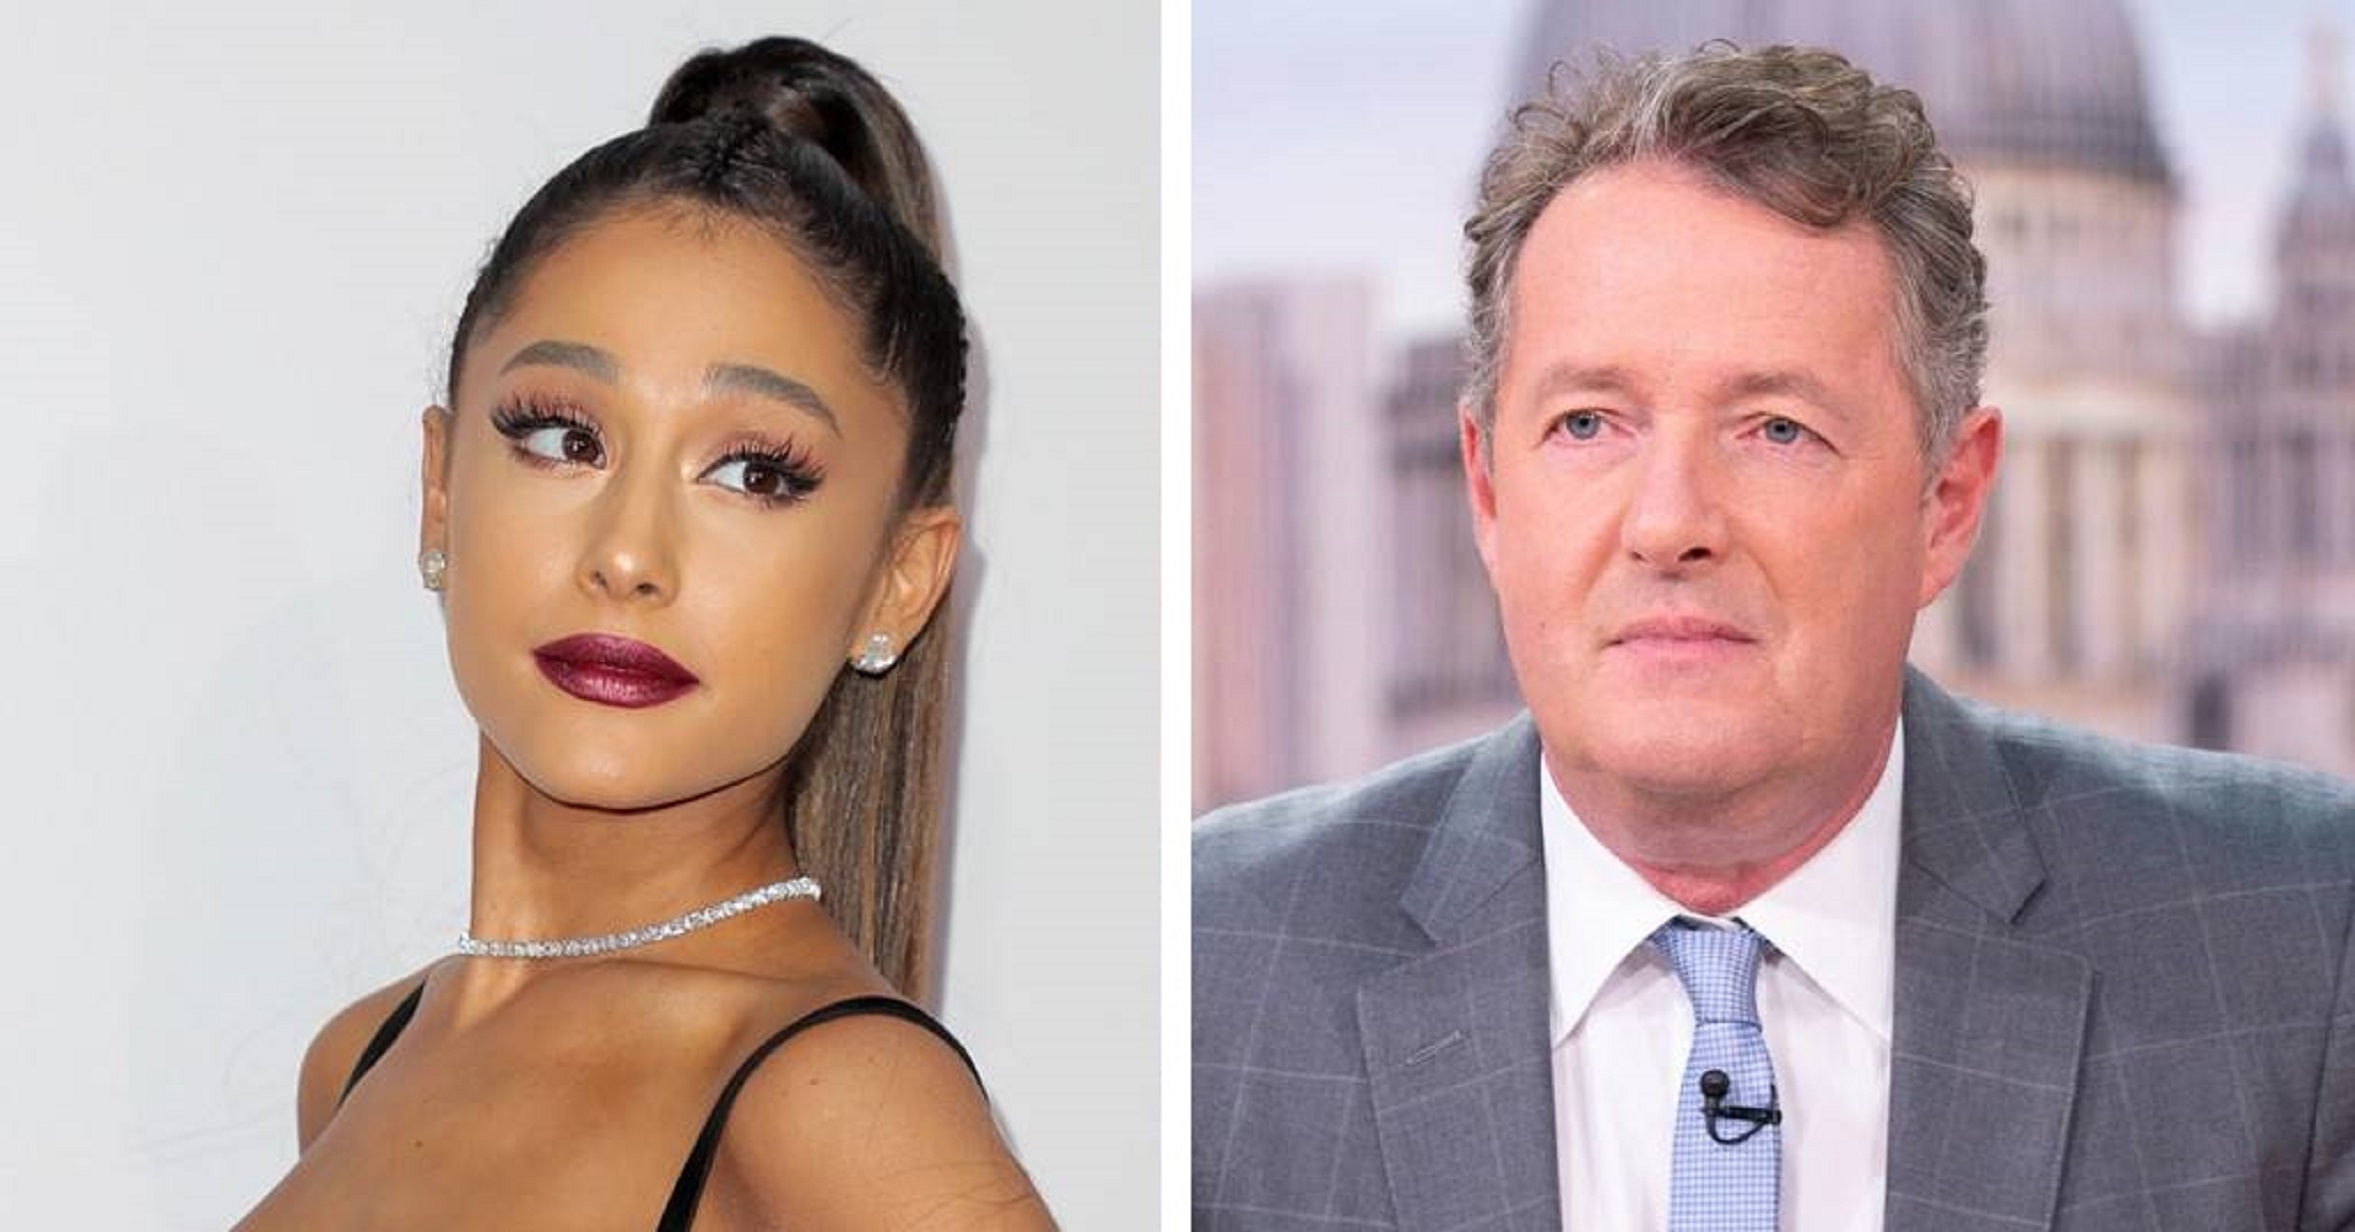 Ariana Grande Claps Back At Piers Morgan After He Accuses Her Of ‘Selling Nudity’